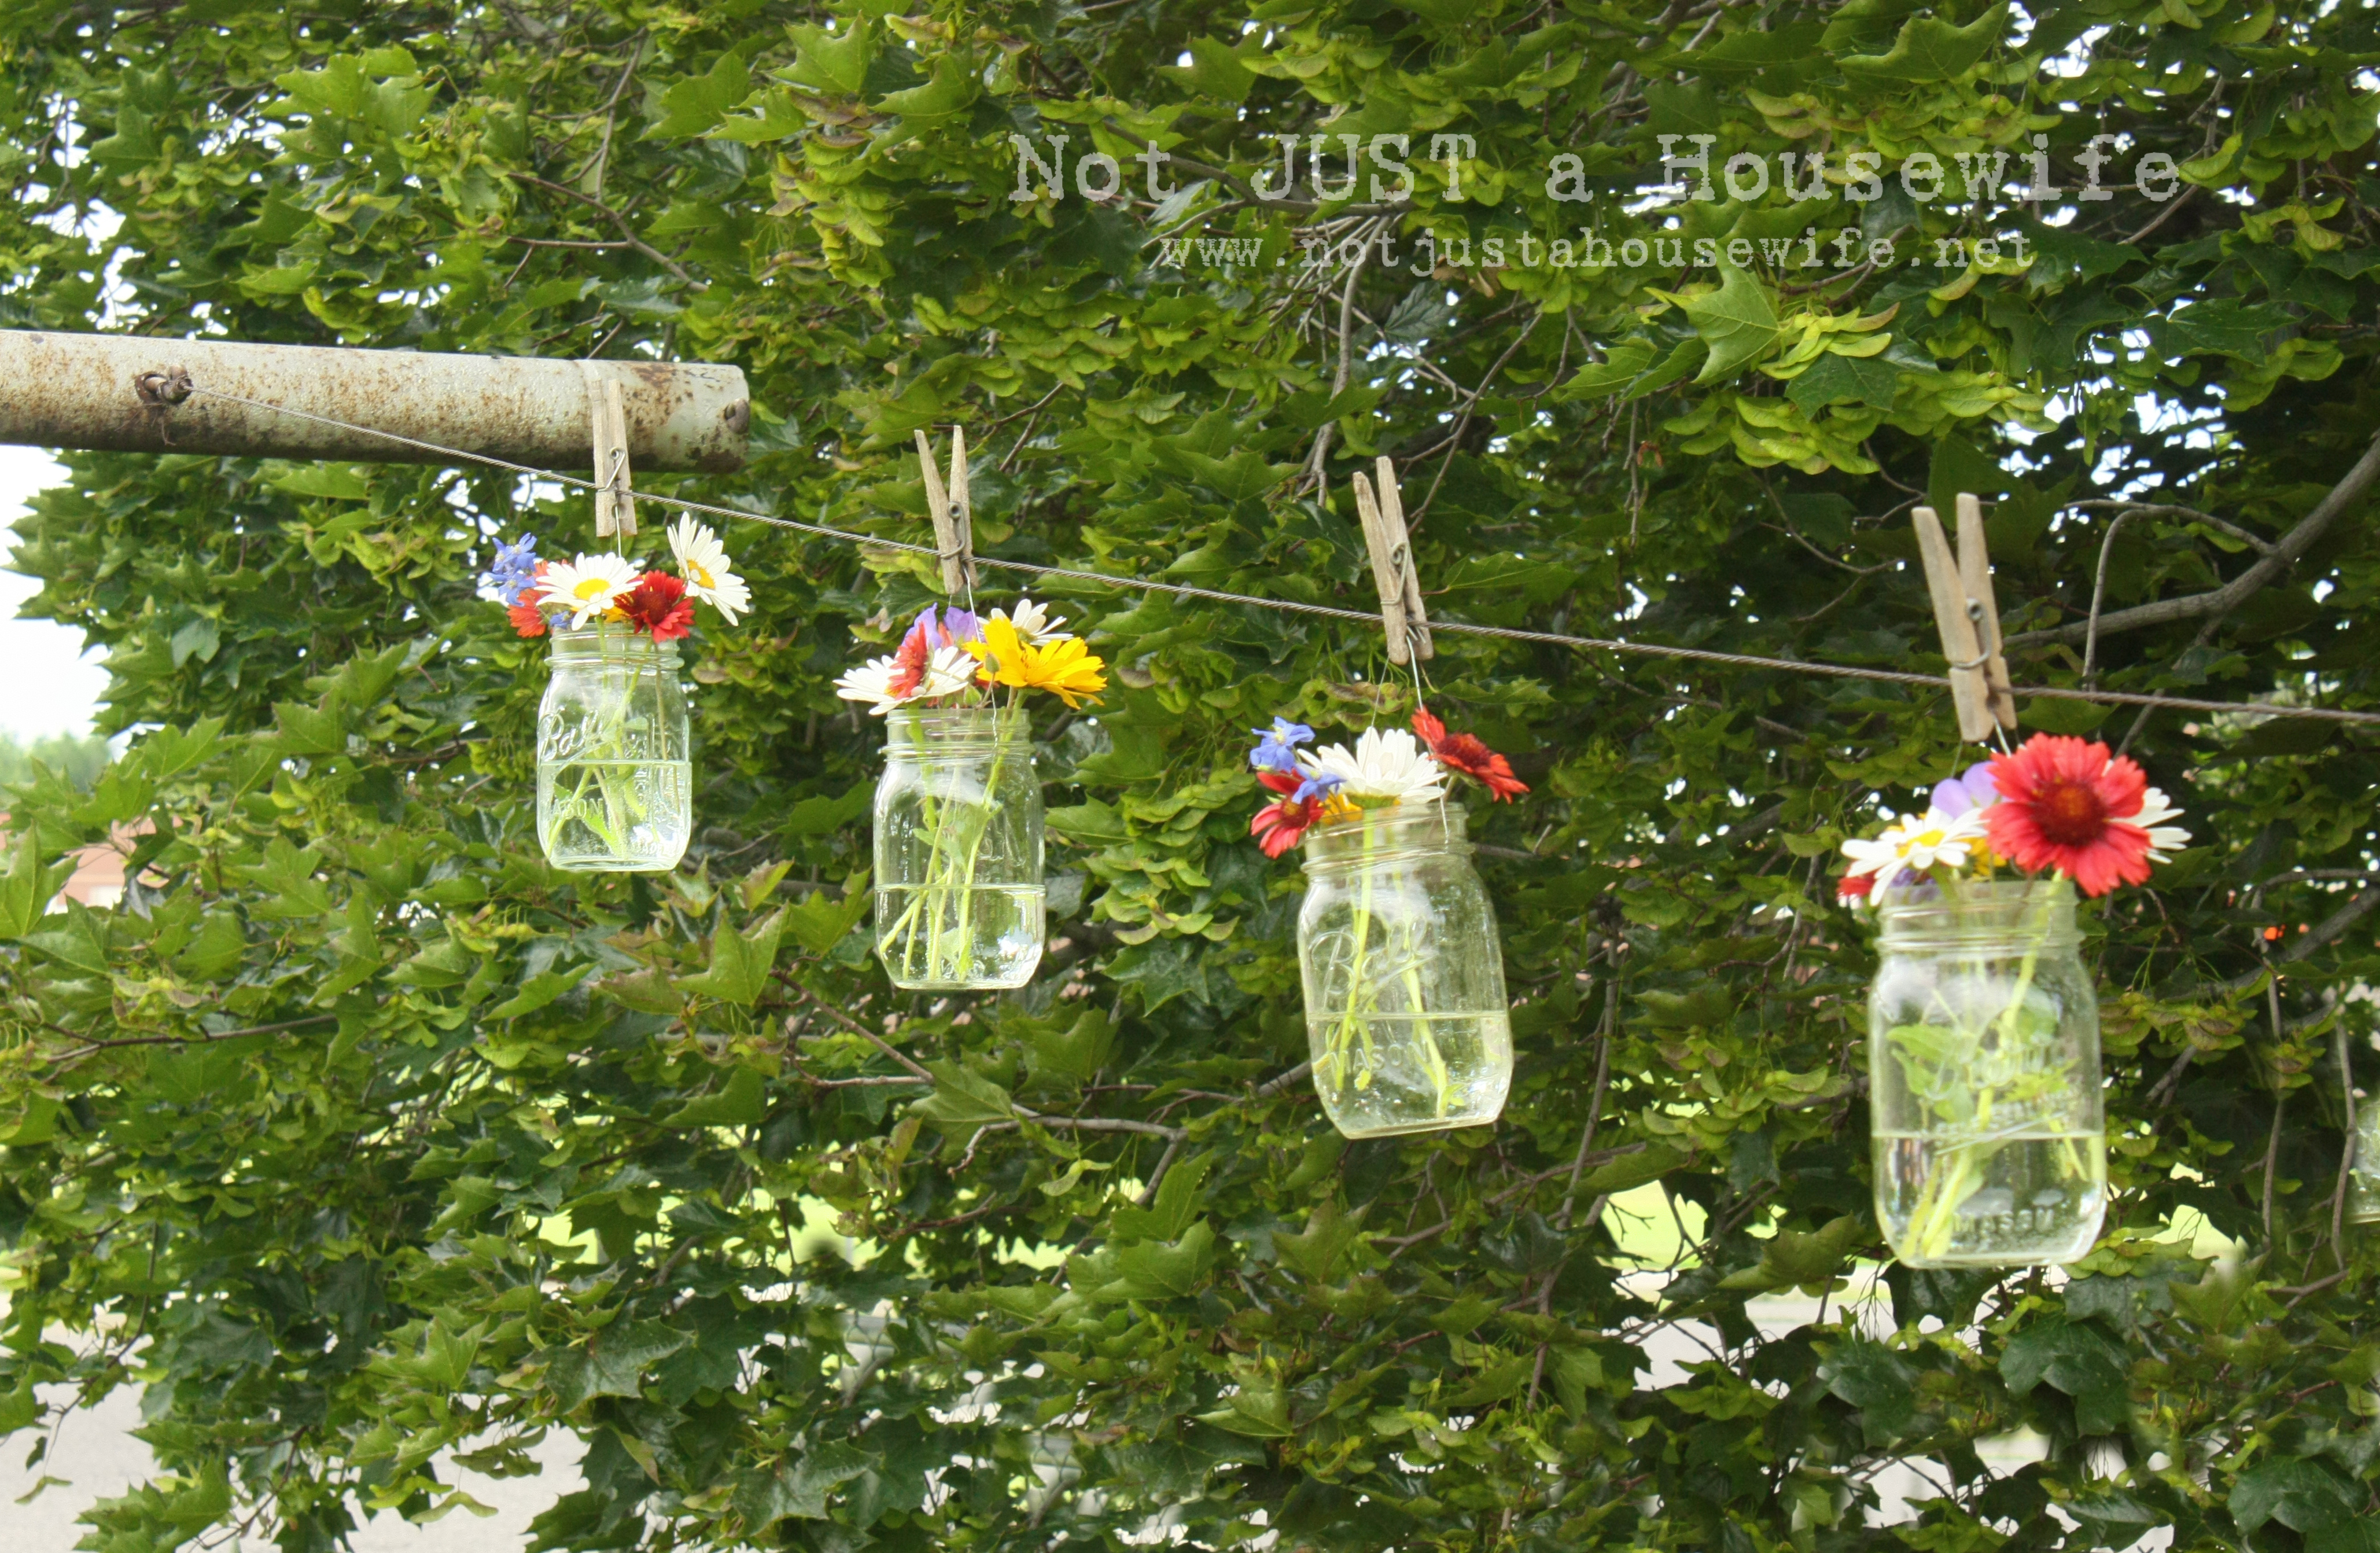 Flowers On The Clothes Line